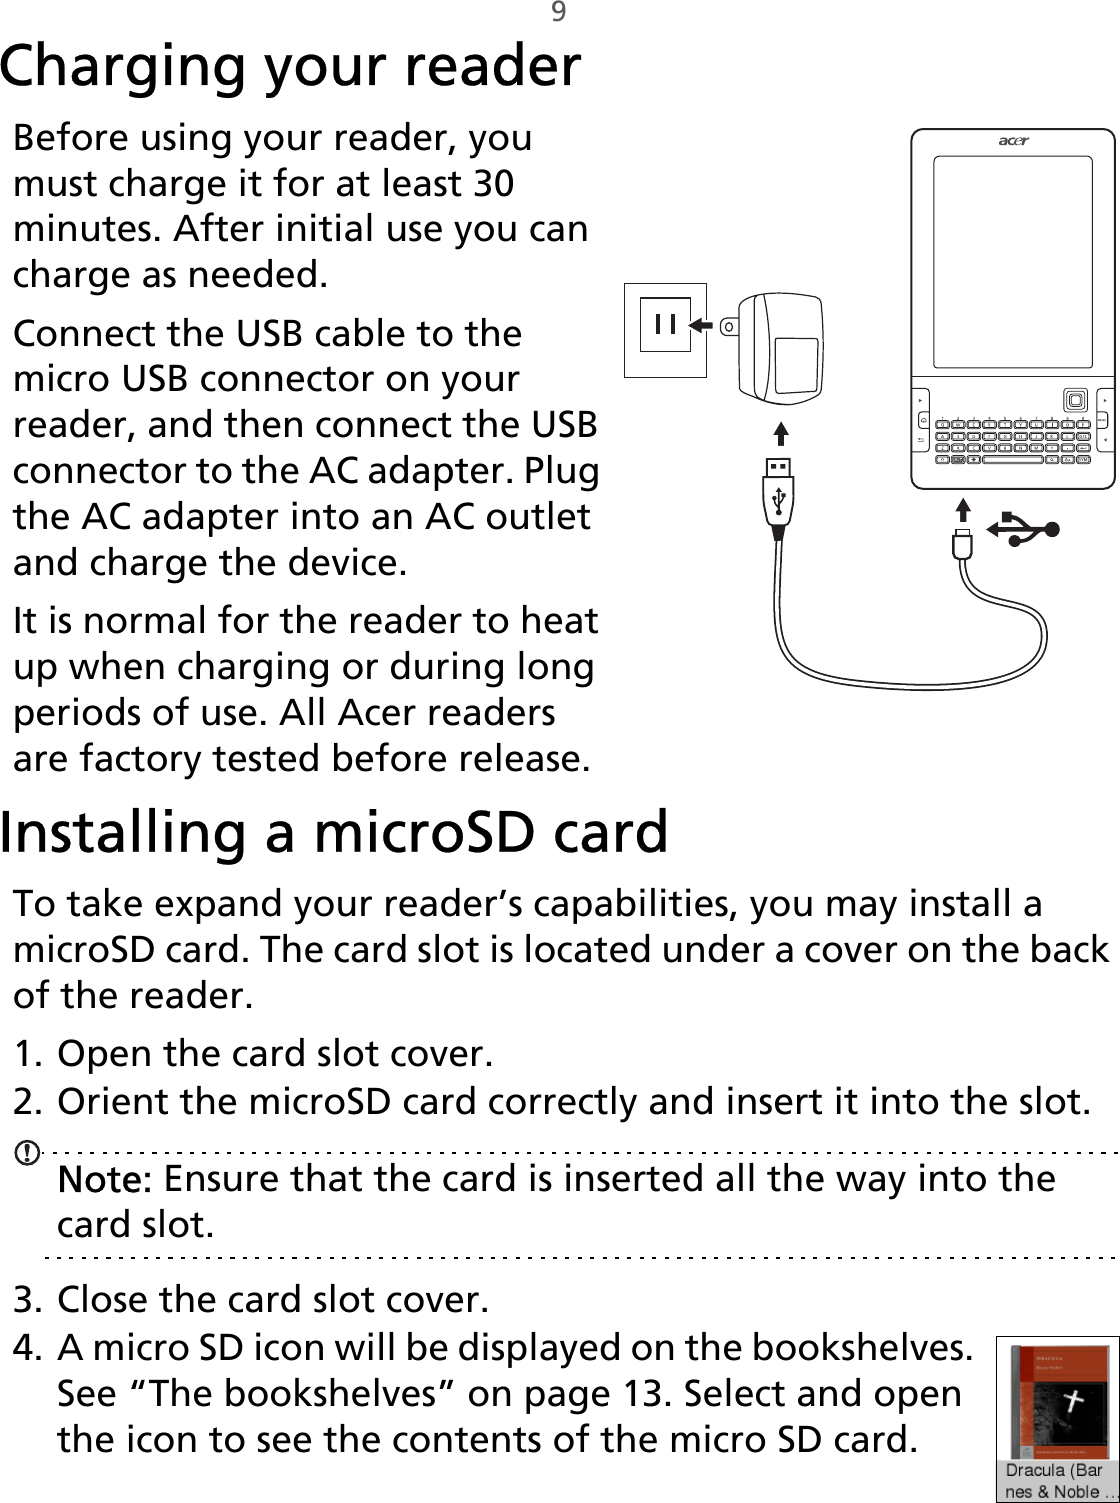 9Charging your reader,Before using your reader, you must charge it for at least 30 minutes. After initial use you can charge as needed.Connect the USB cable to the micro USB connector on your reader, and then connect the USB connector to the AC adapter. Plug the AC adapter into an AC outlet and charge the device.It is normal for the reader to heat up when charging or during long periods of use. All Acer readers are factory tested before release.Installing a microSD cardTo take expand your reader’s capabilities, you may install a microSD card. The card slot is located under a cover on the back of the reader.1. Open the card slot cover.2. Orient the microSD card correctly and insert it into the slot.Note: Ensure that the card is inserted all the way into the card slot.3. Close the card slot cover.4. A micro SD icon will be displayed on the bookshelves. See “The bookshelves” on page 13. Select and open the icon to see the contents of the micro SD card.